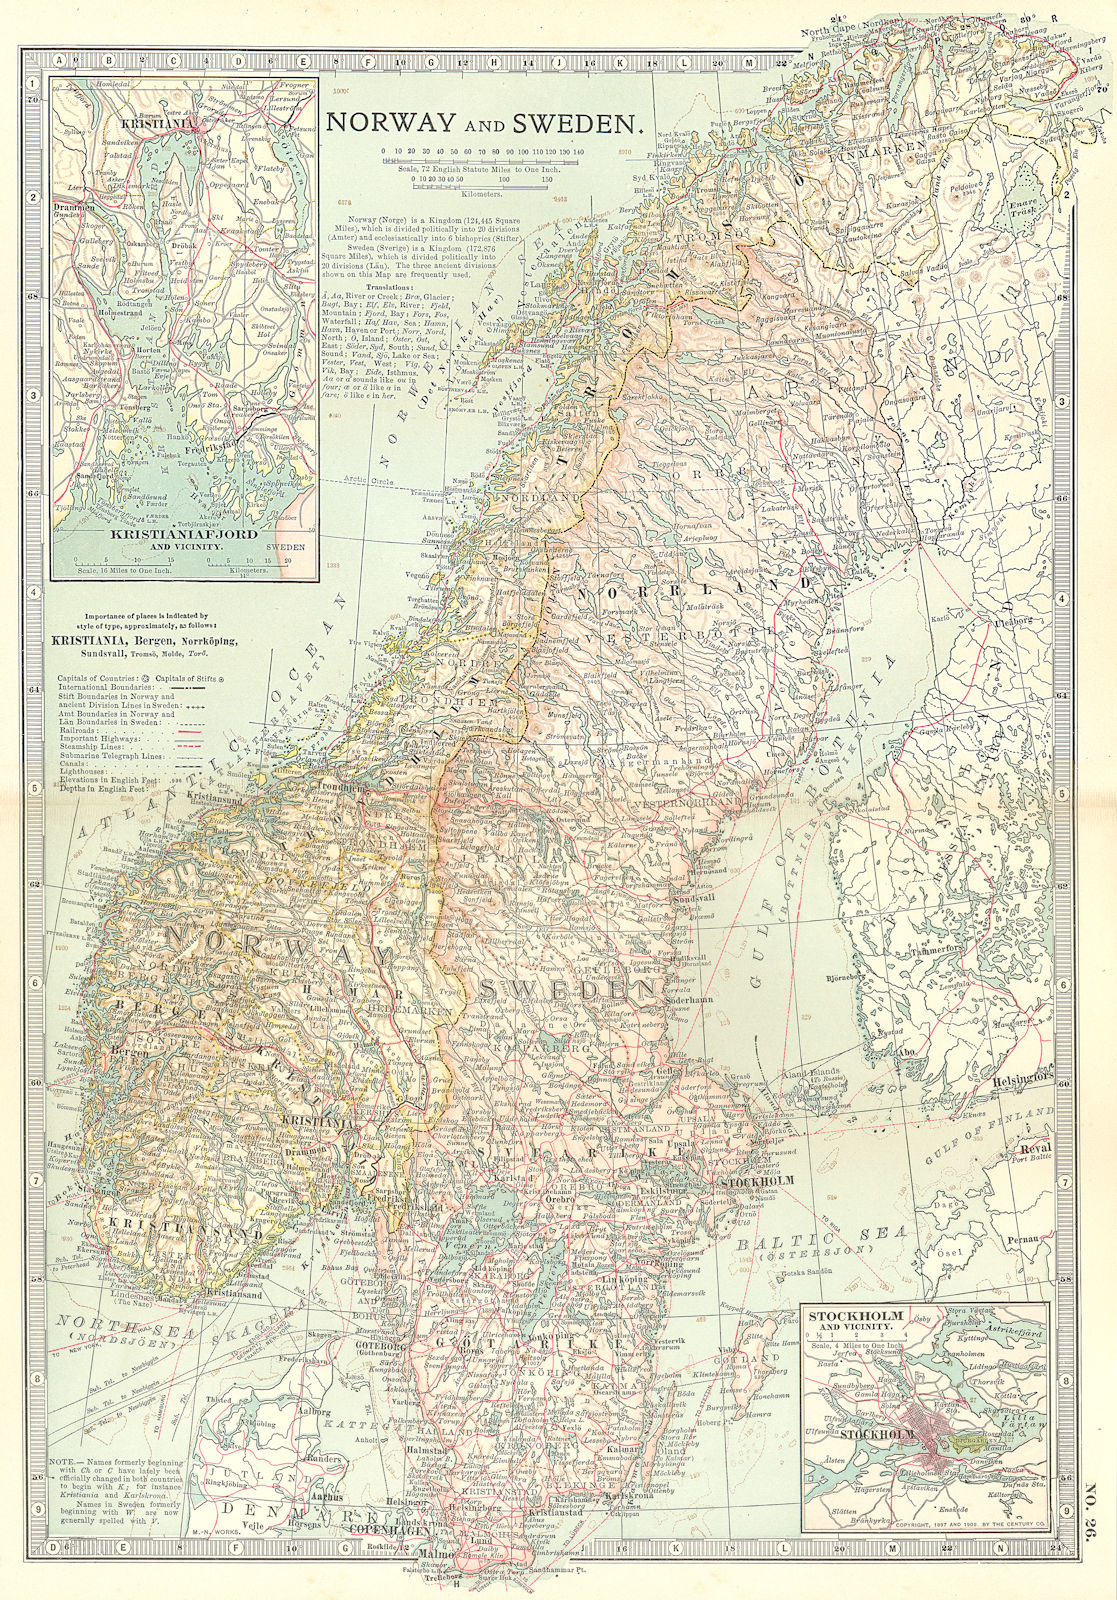 Associate Product SCANDINAVIA. Norway, Sweden; Inset Oslo, Stockholm; Kristianiafjord 1903 map